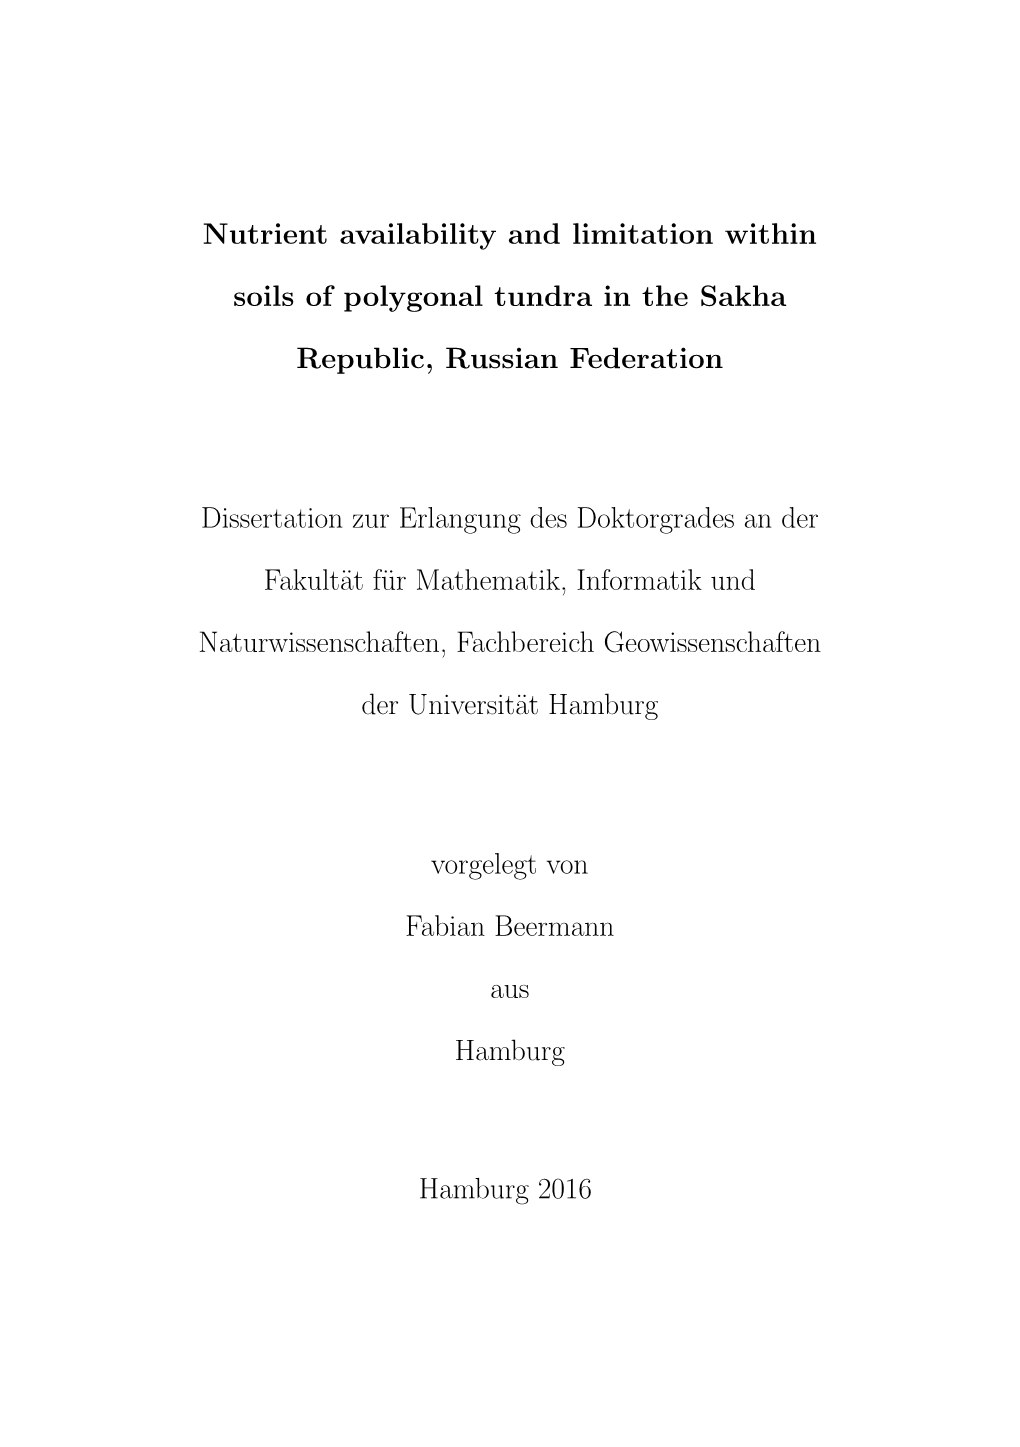 Nutrient Availability and Limitation Within Soils of Polygonal Tundra in the Sakha Republic, Russian Federation Dissertation